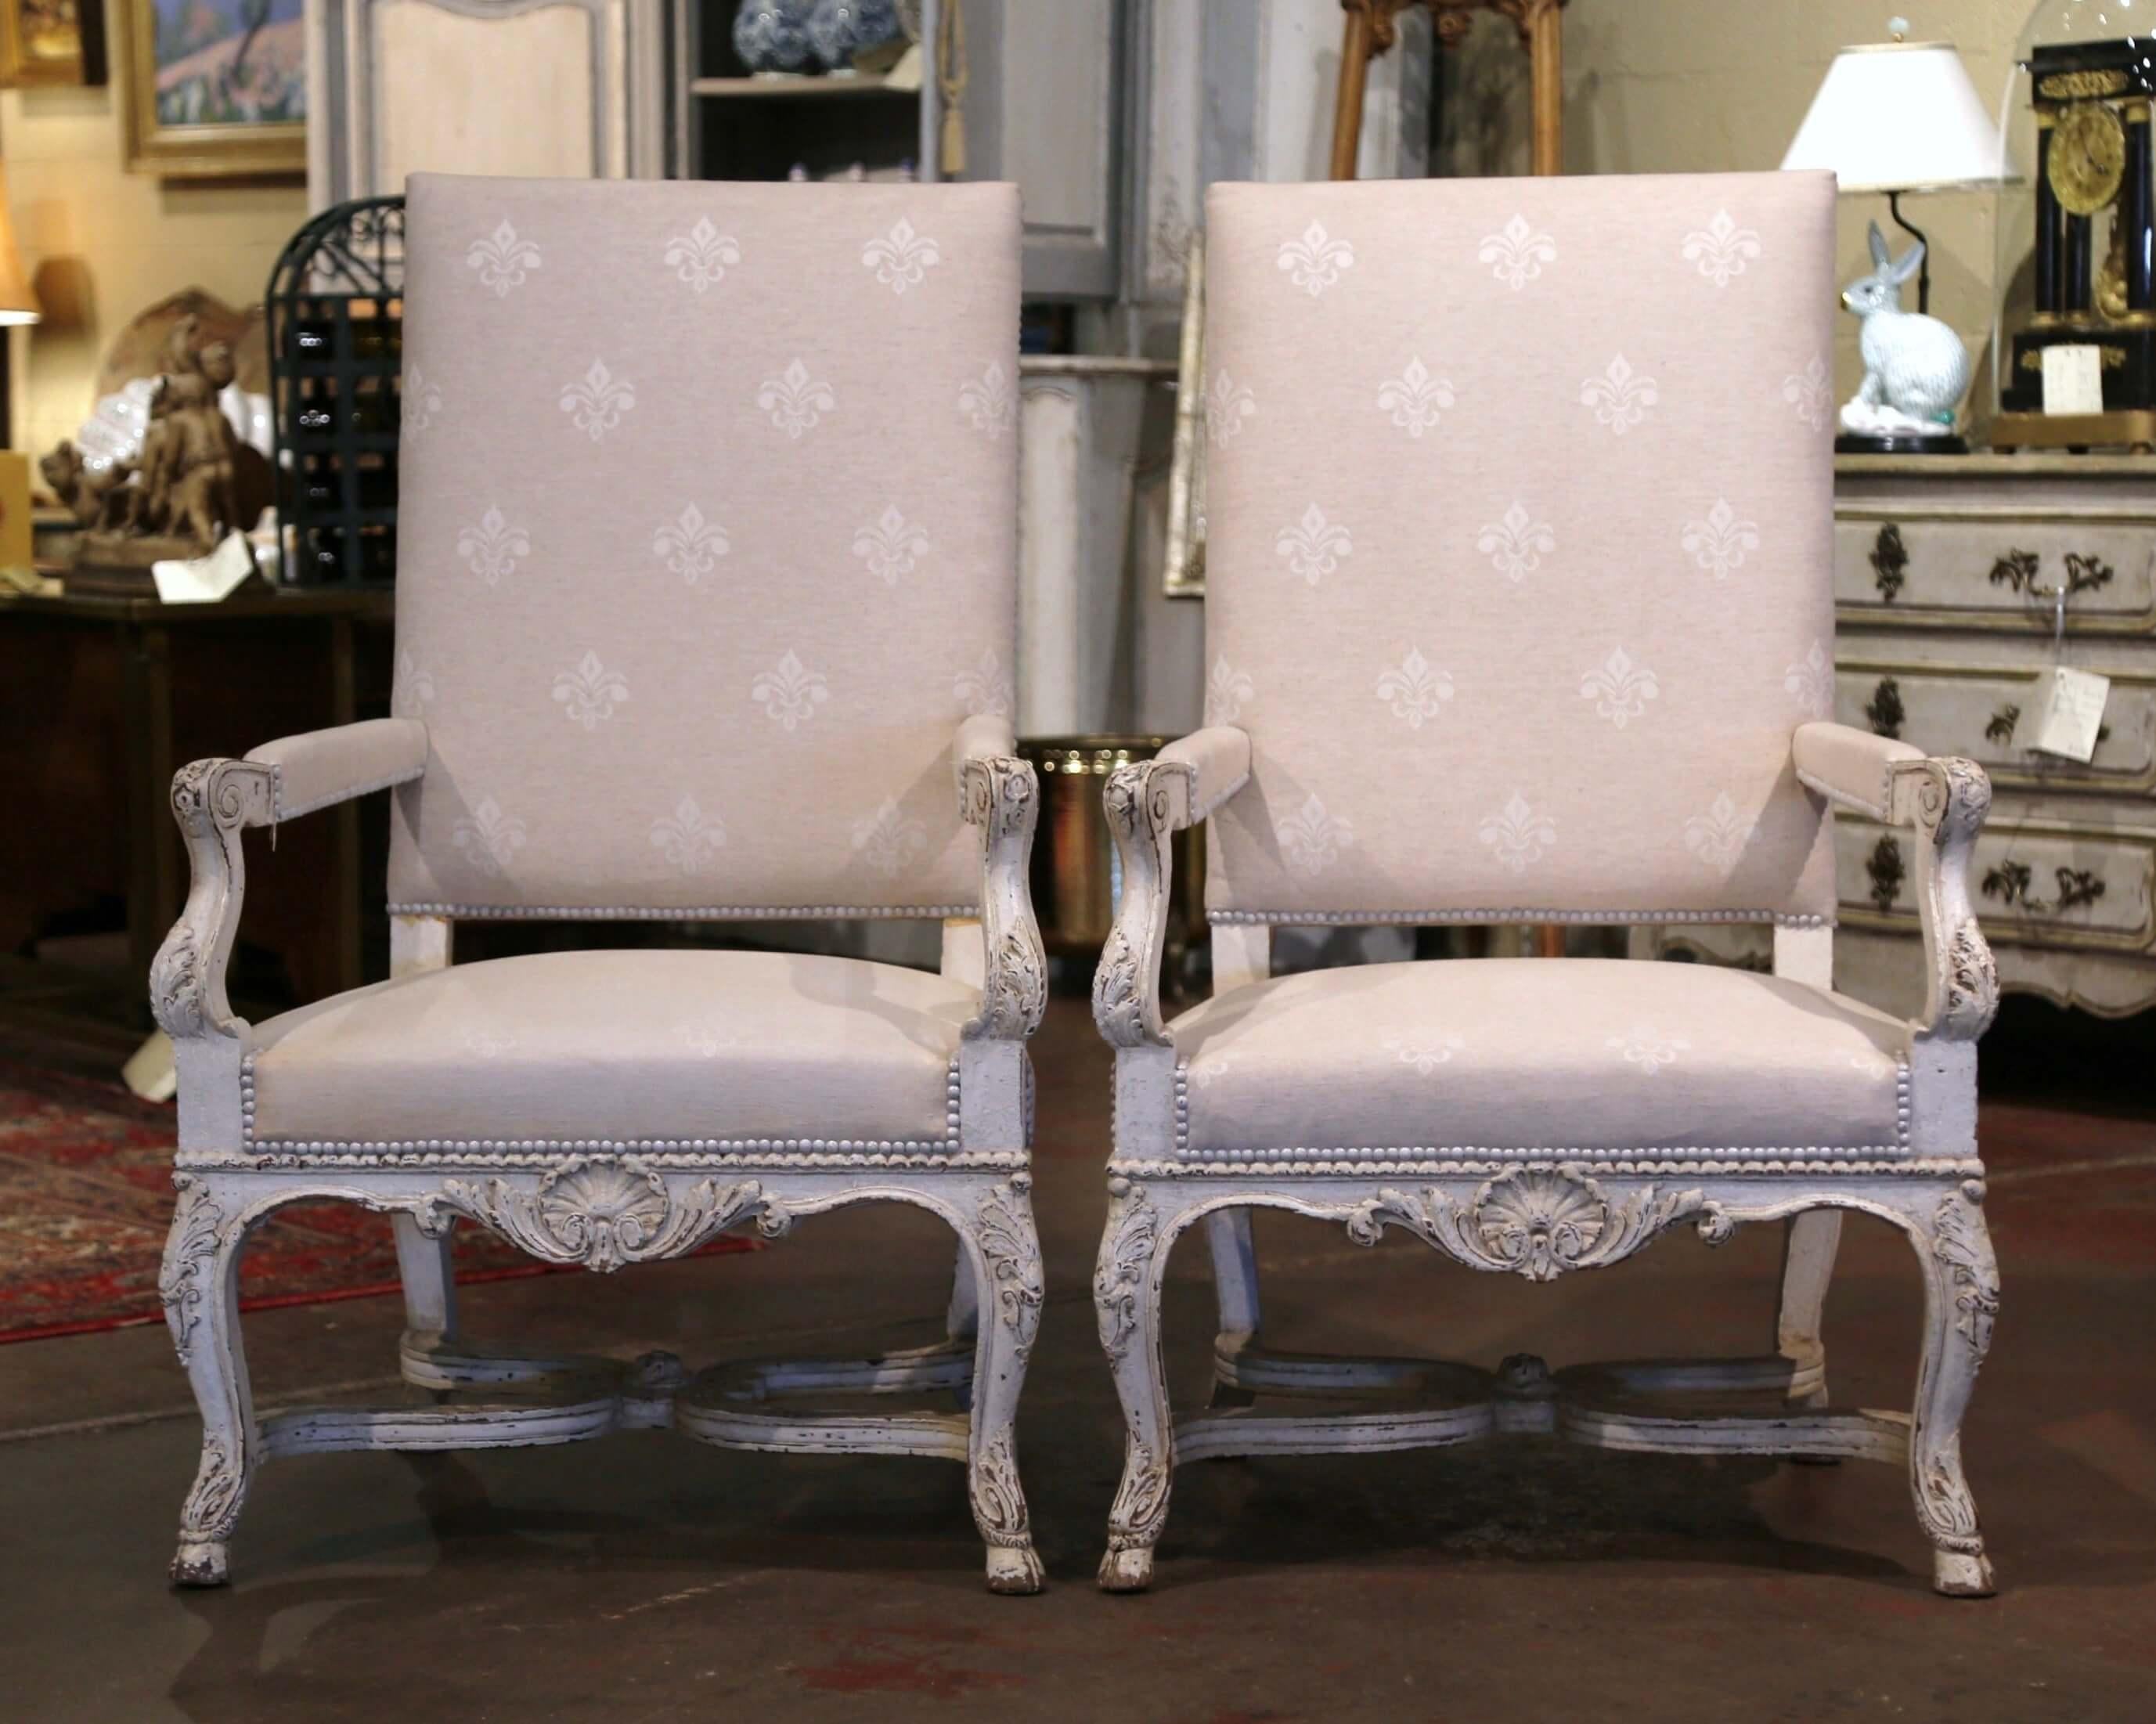 These elegant antique armchairs were crafted in France, circa 1870. Each large fauteuil stands on cabriole legs ending with hoof feet over an intricate curved bottom stretcher embellished with a middle carved floral medallion; it is further